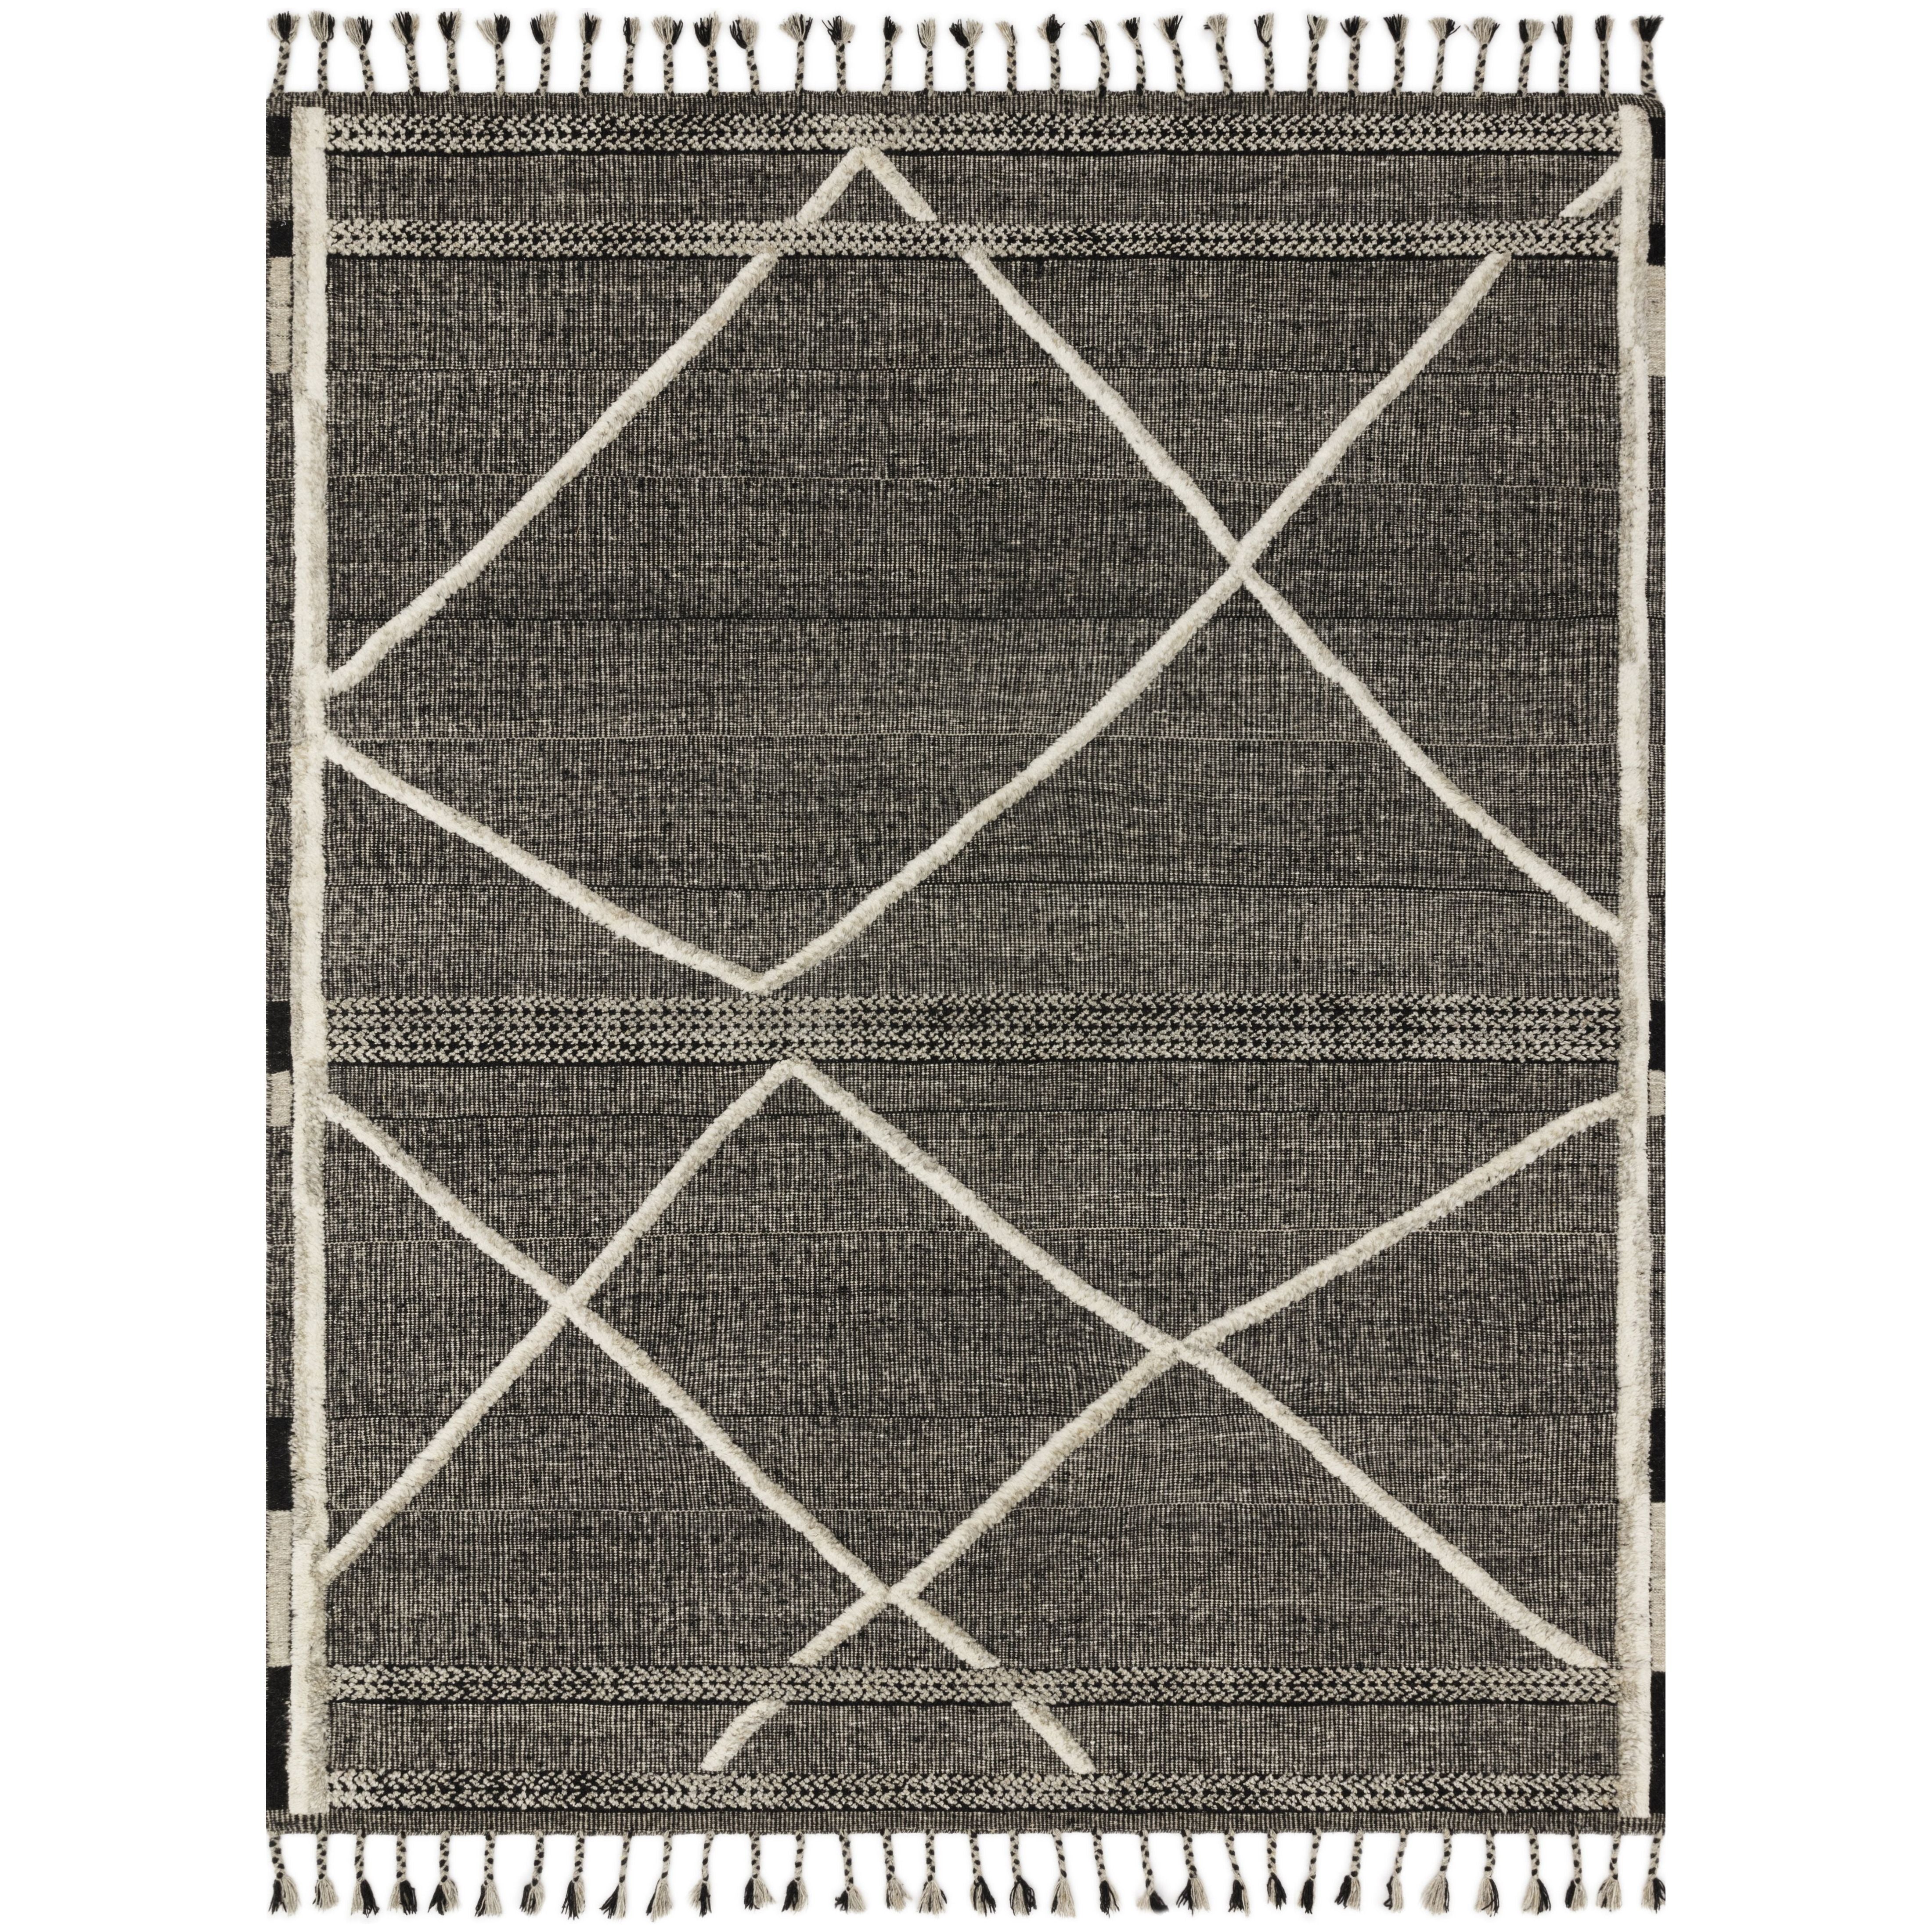 Iman Beige/Charcoal Rug - Amethyst Home A new take on Moroccan style rugs, the Iman Collection is hand-knotted of 100% wool pile by skilled artisans in India. The surface features linear and braided details, creating tonal variations that make each piece unique. Plus, each design is finished with playful fringe.